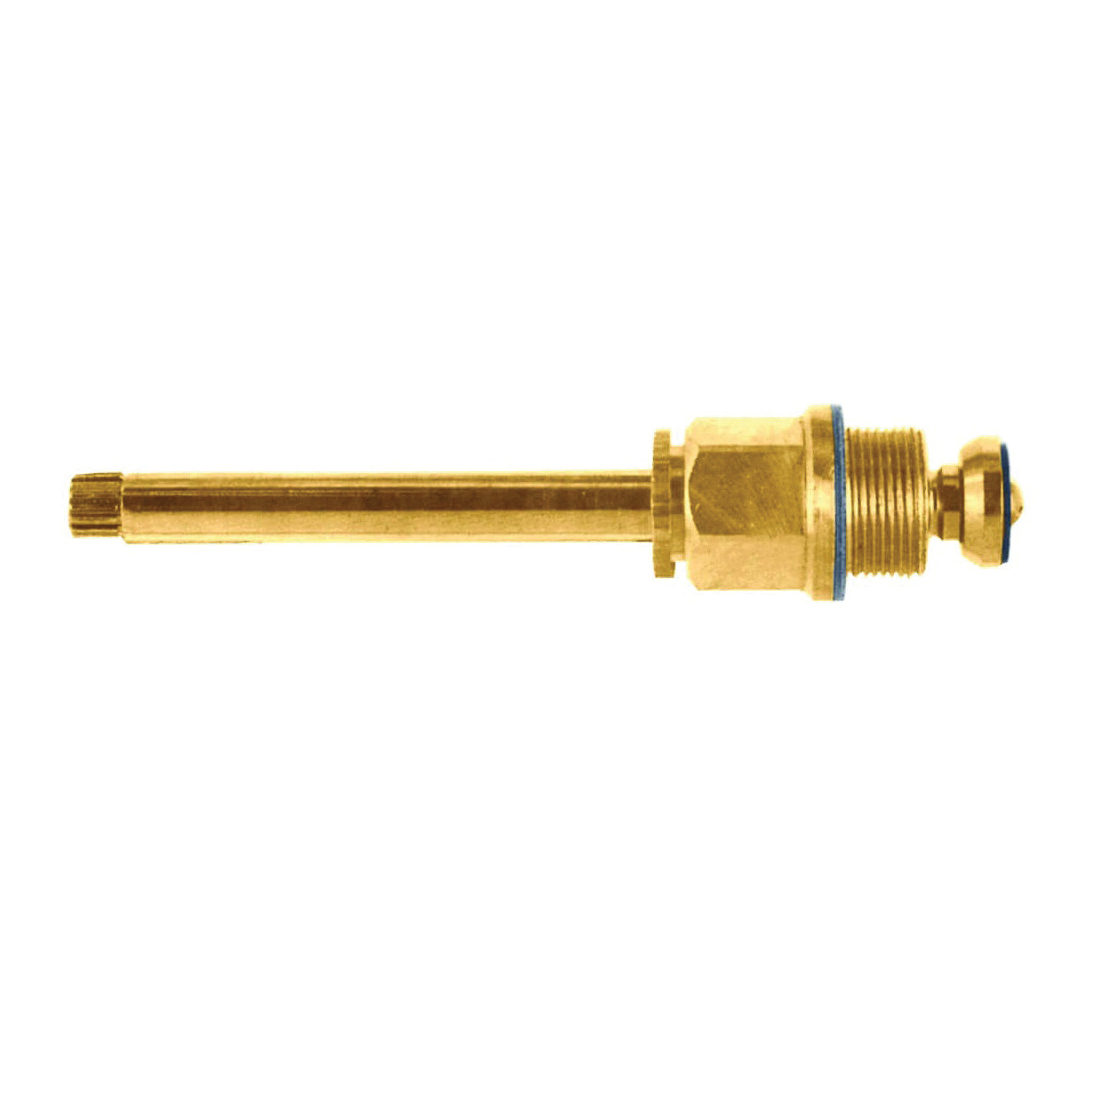 15098B Faucet Stem, Brass, 5-5/16 in L, For: Central Brass Series 9818 Two Handle Bath Faucets